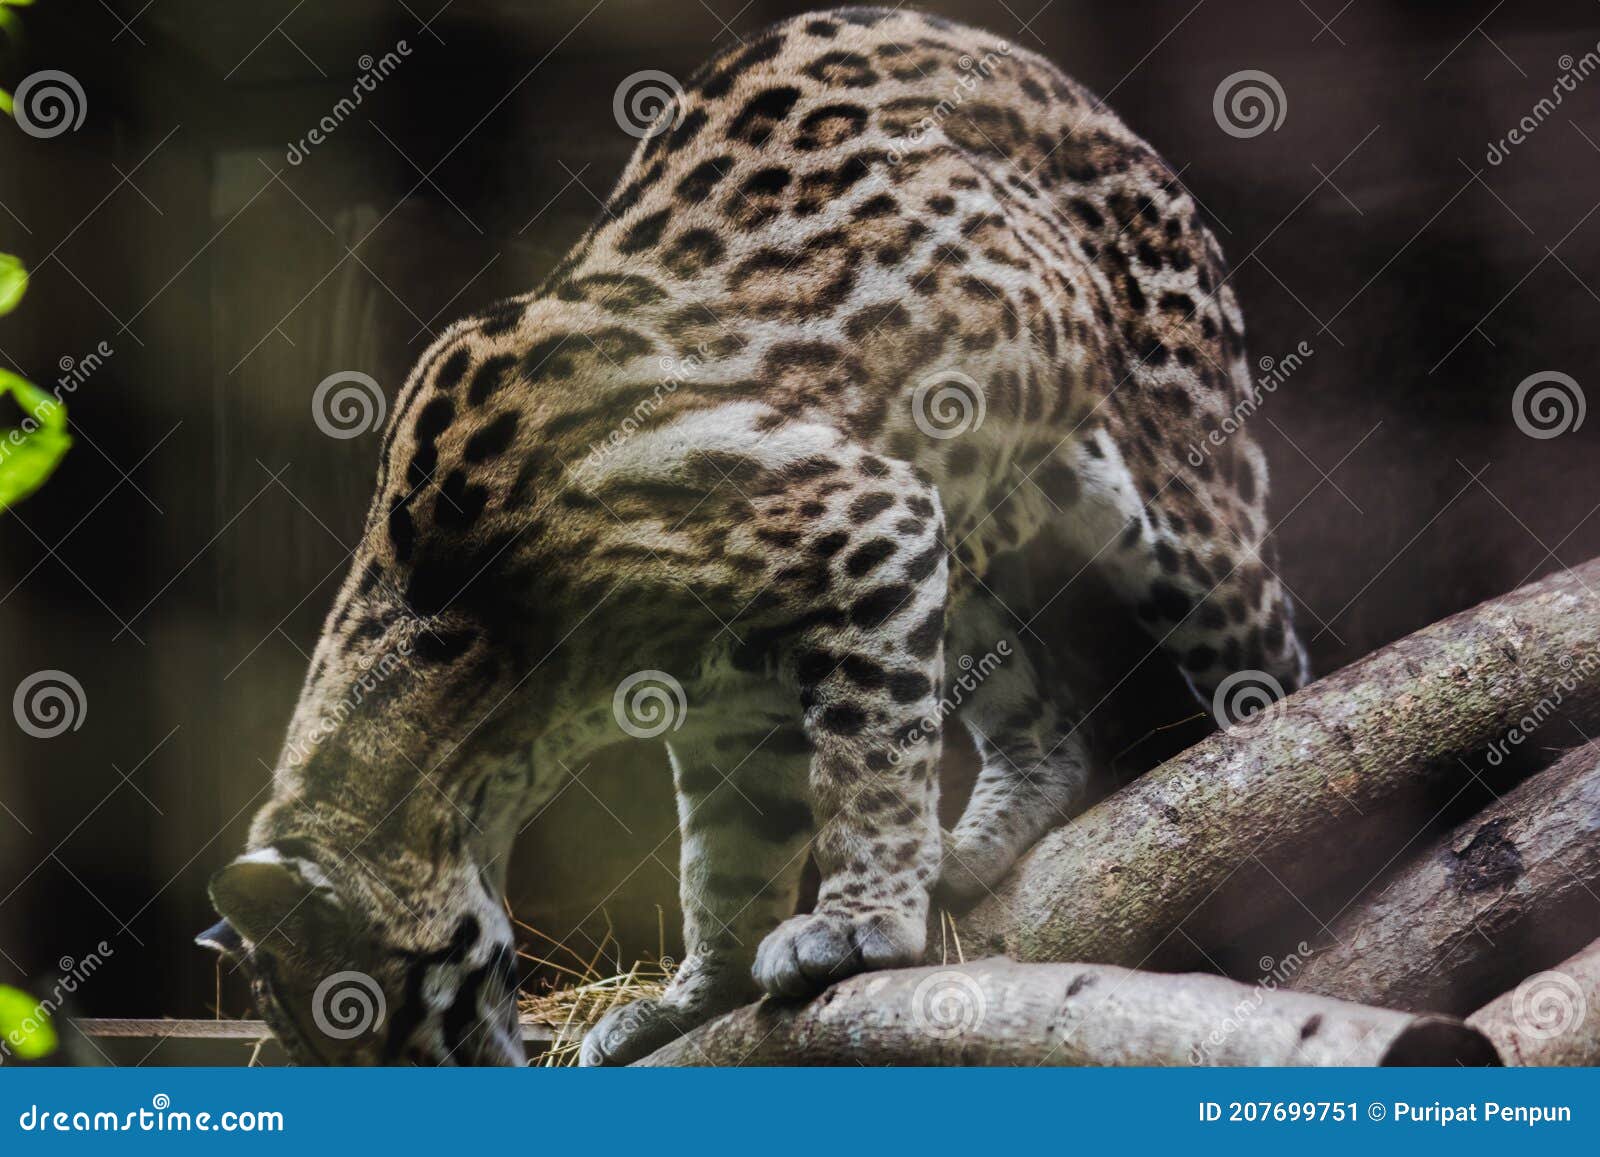 ocelot on a branch exhibited in the zoo